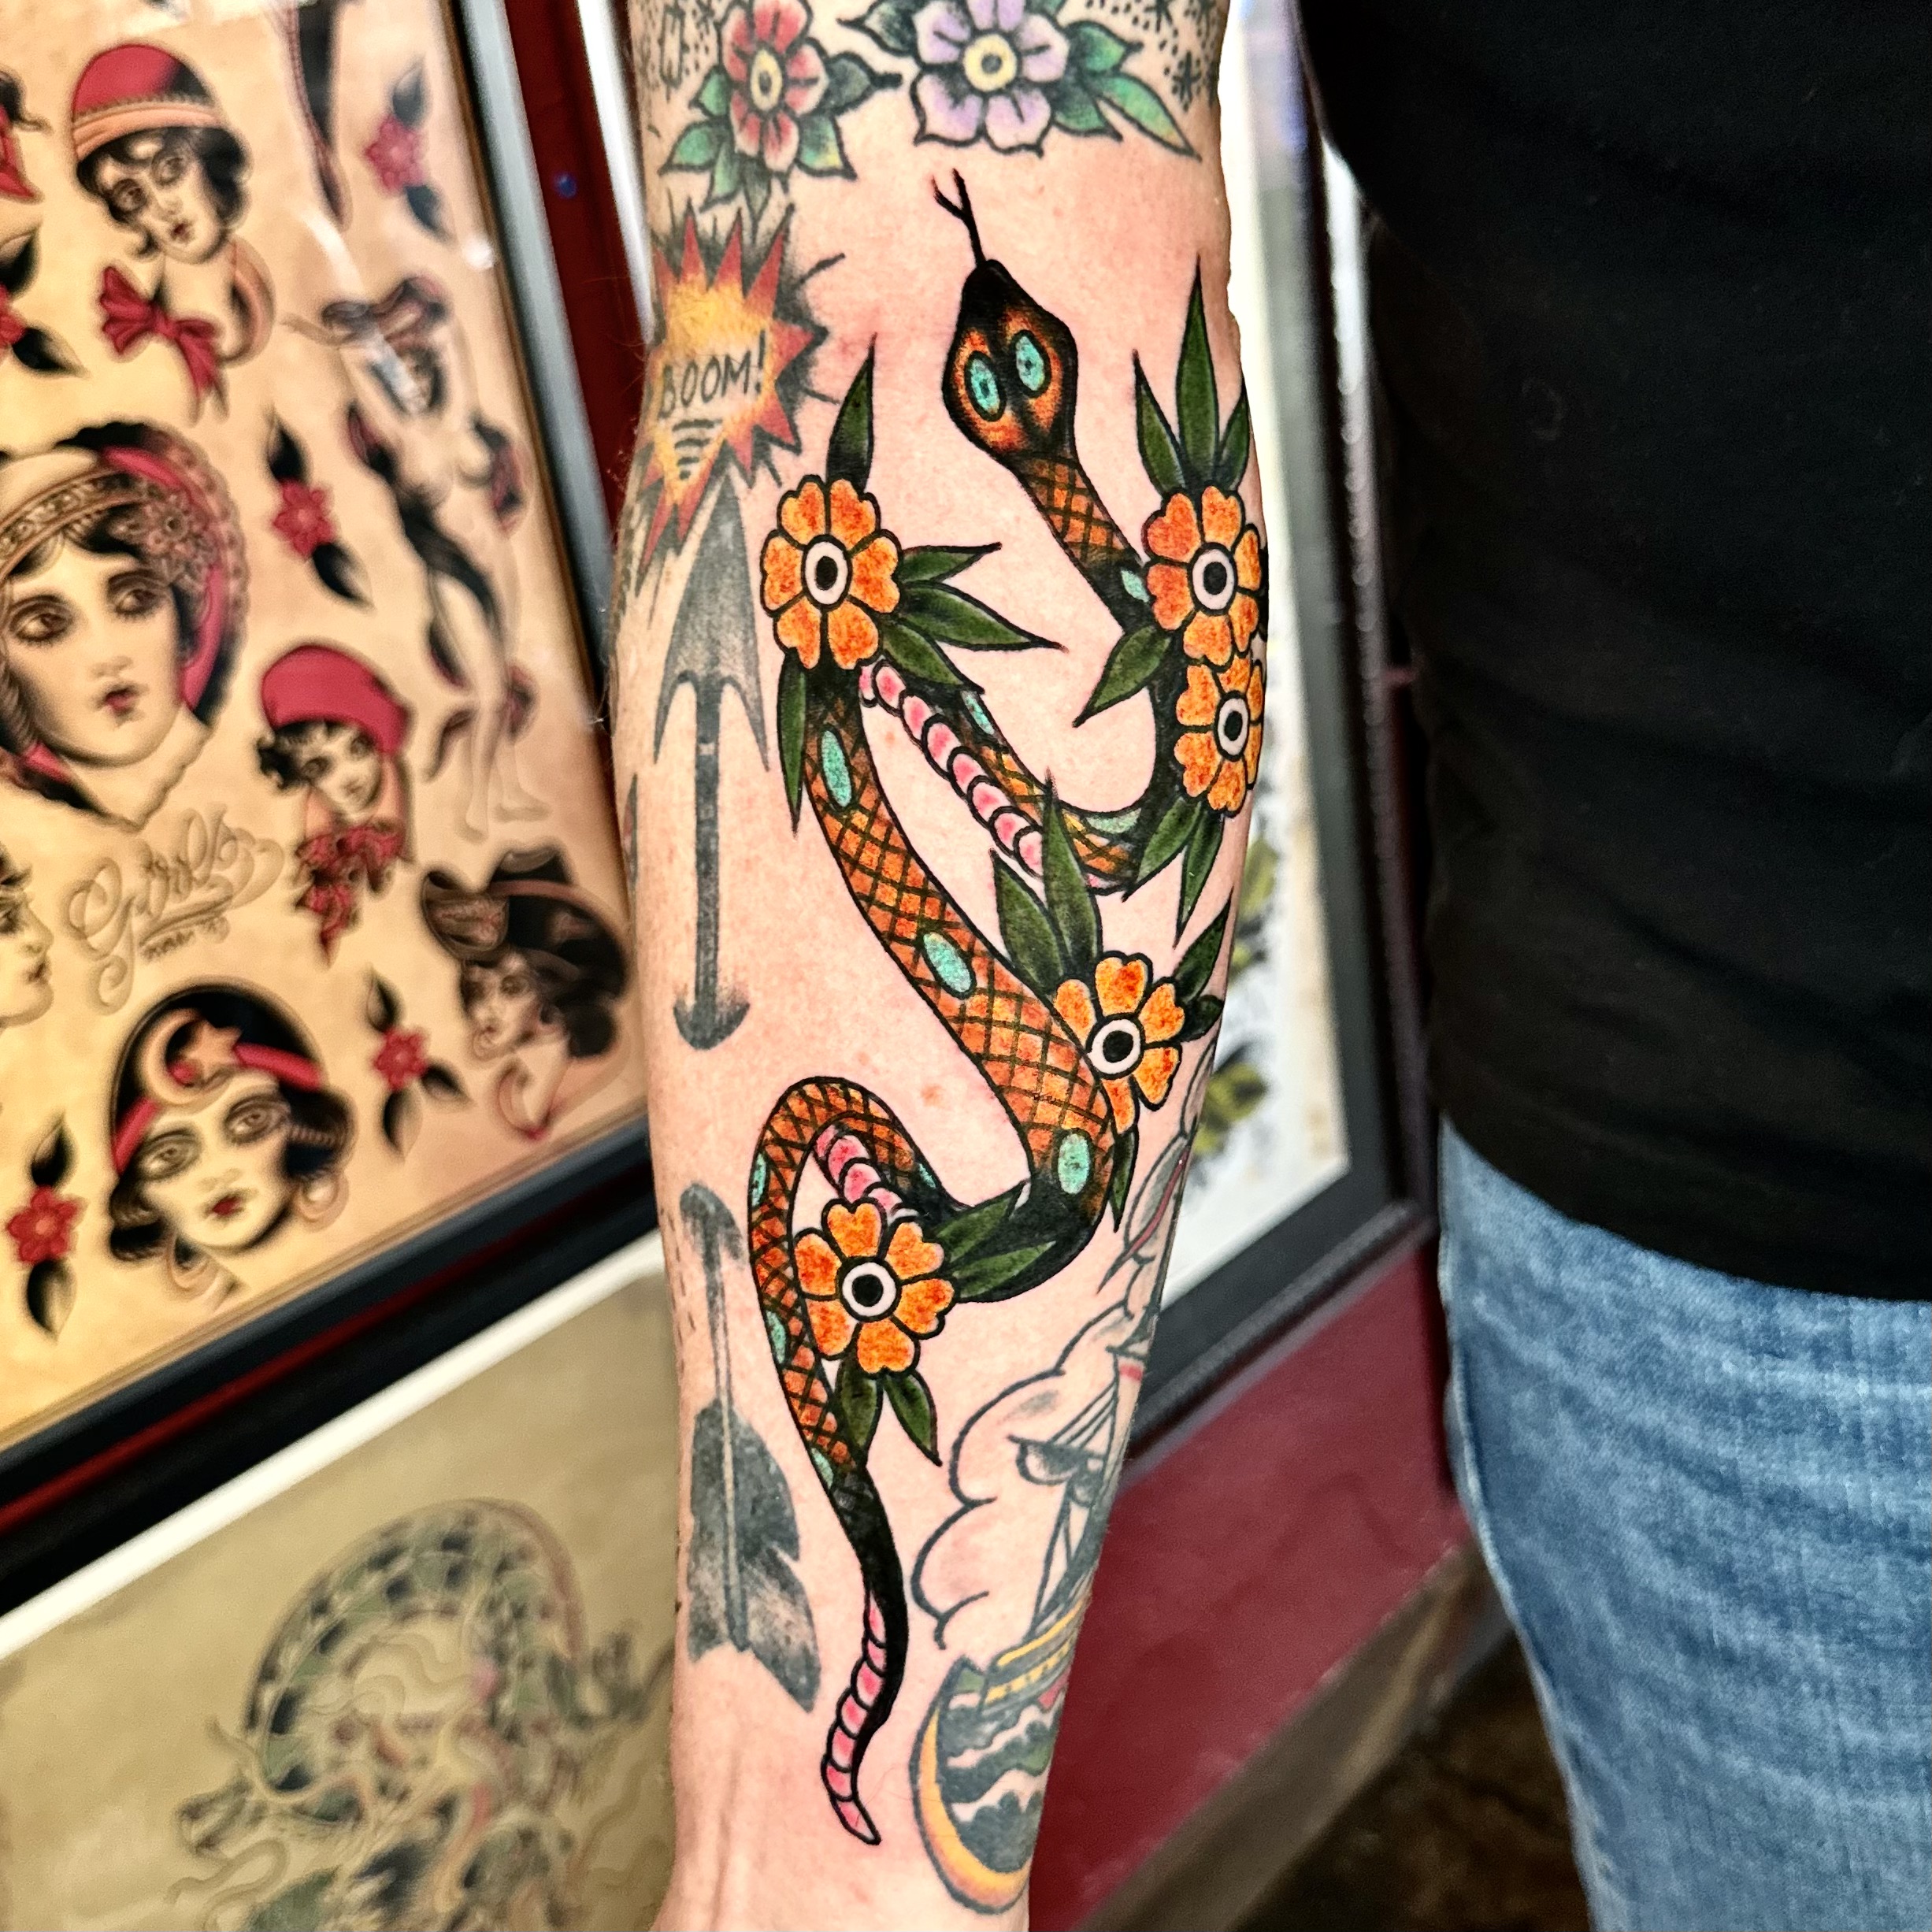 Tattoo of a snake and flowers